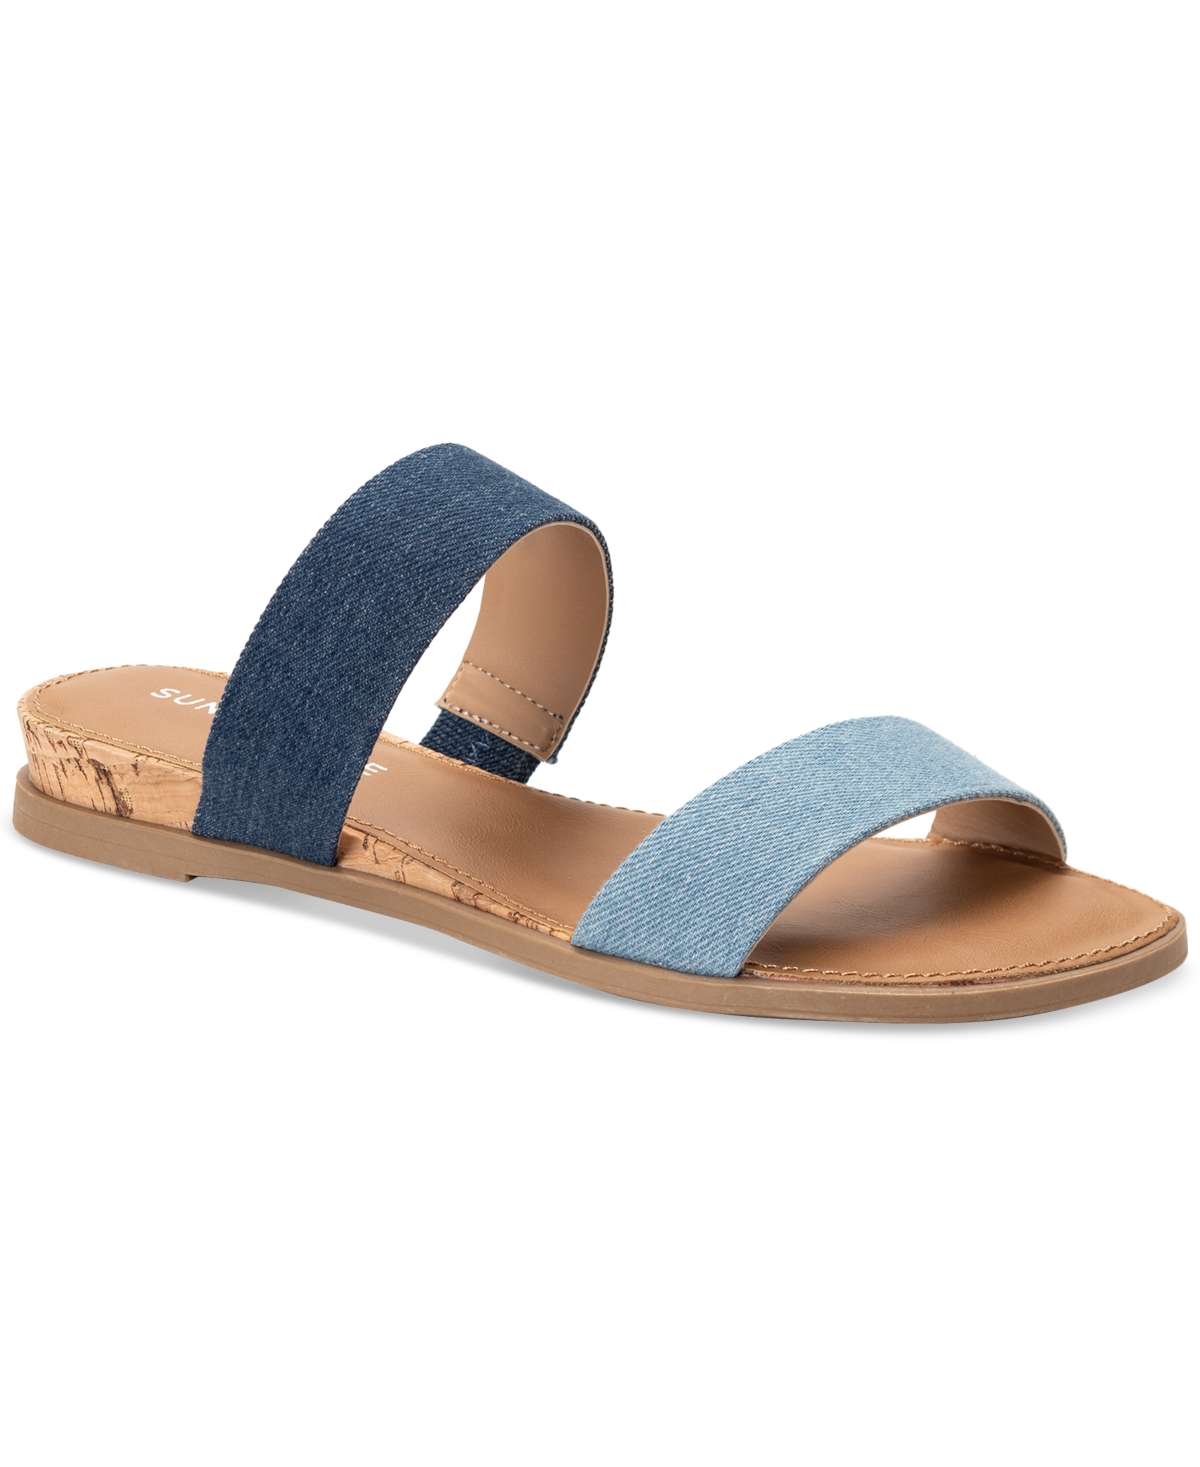 Women's Easten Double Band Slide Flat Sandals, Created for Macy's - Gold Texture